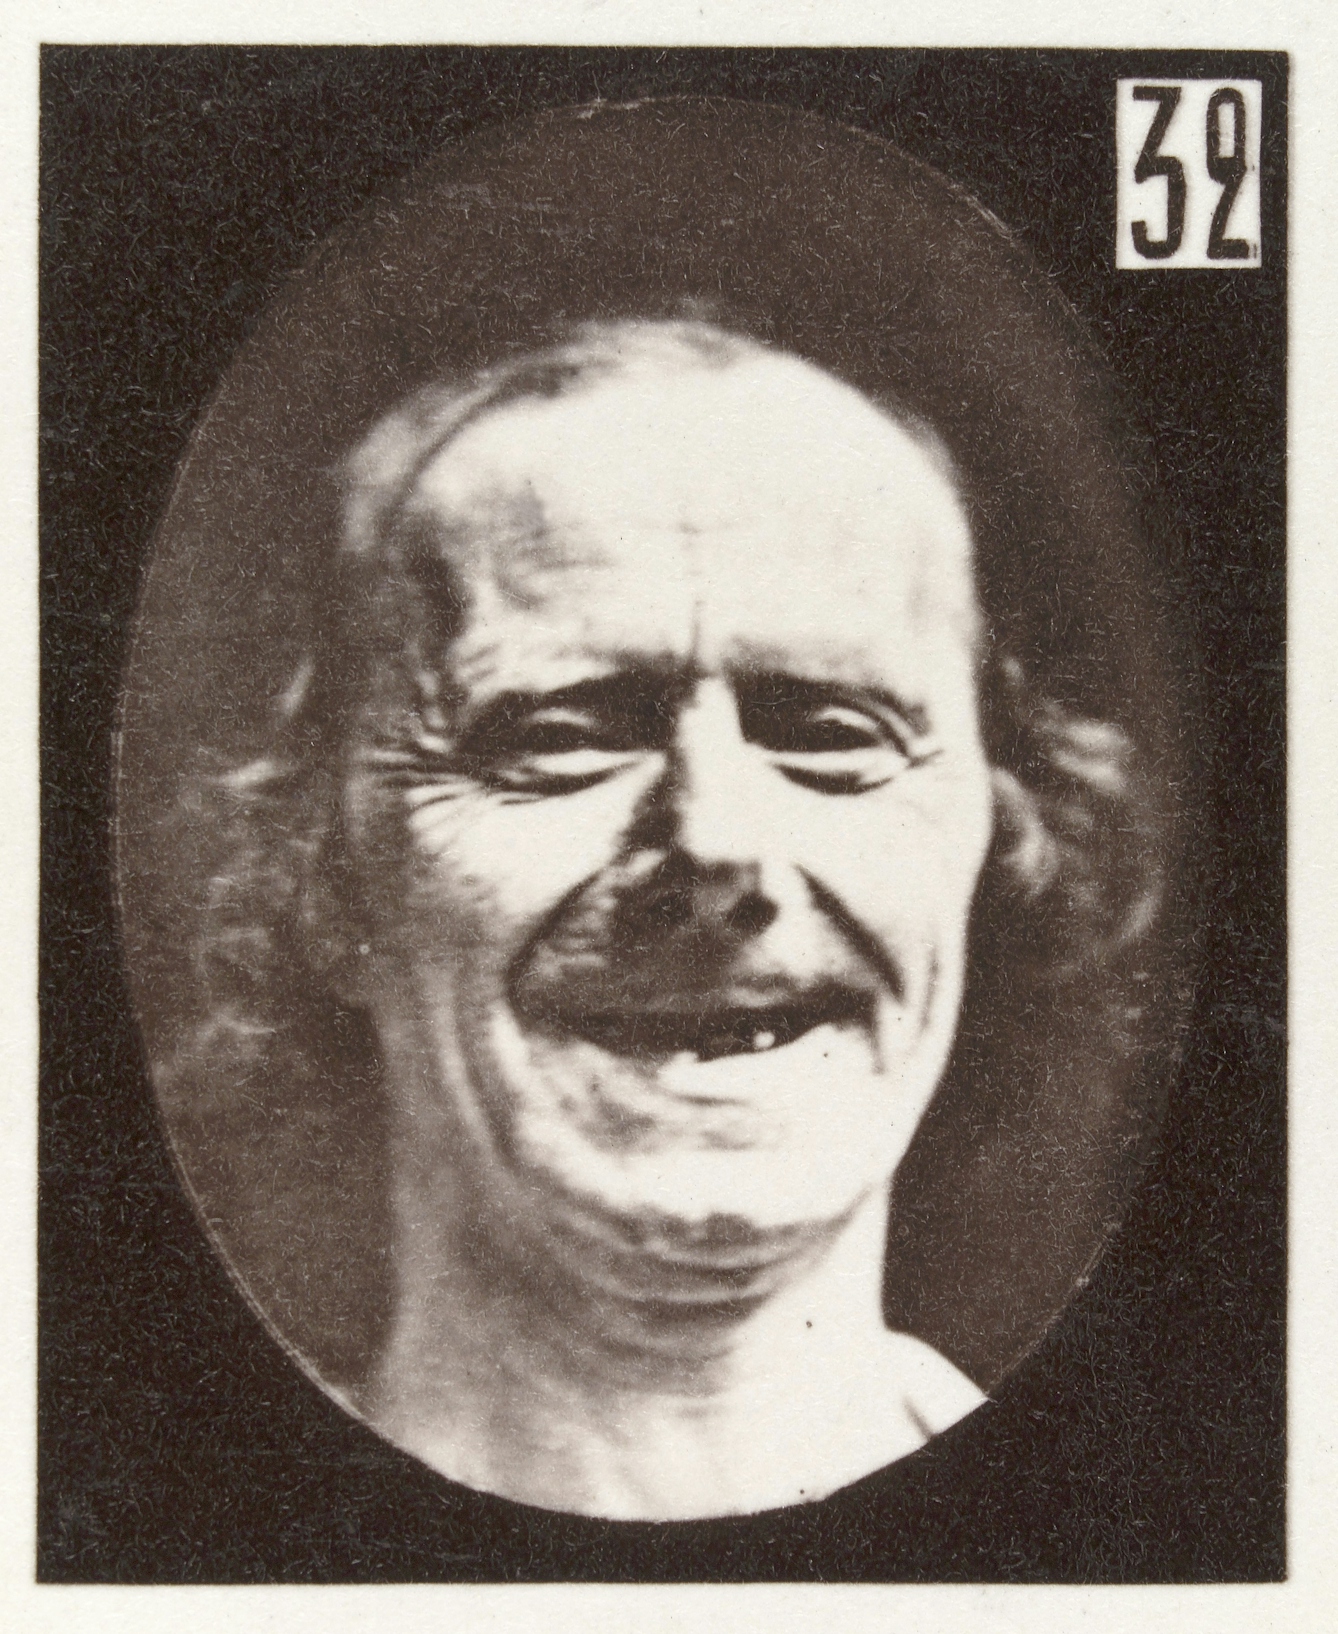 Photograph of a man's face showing natural laughter